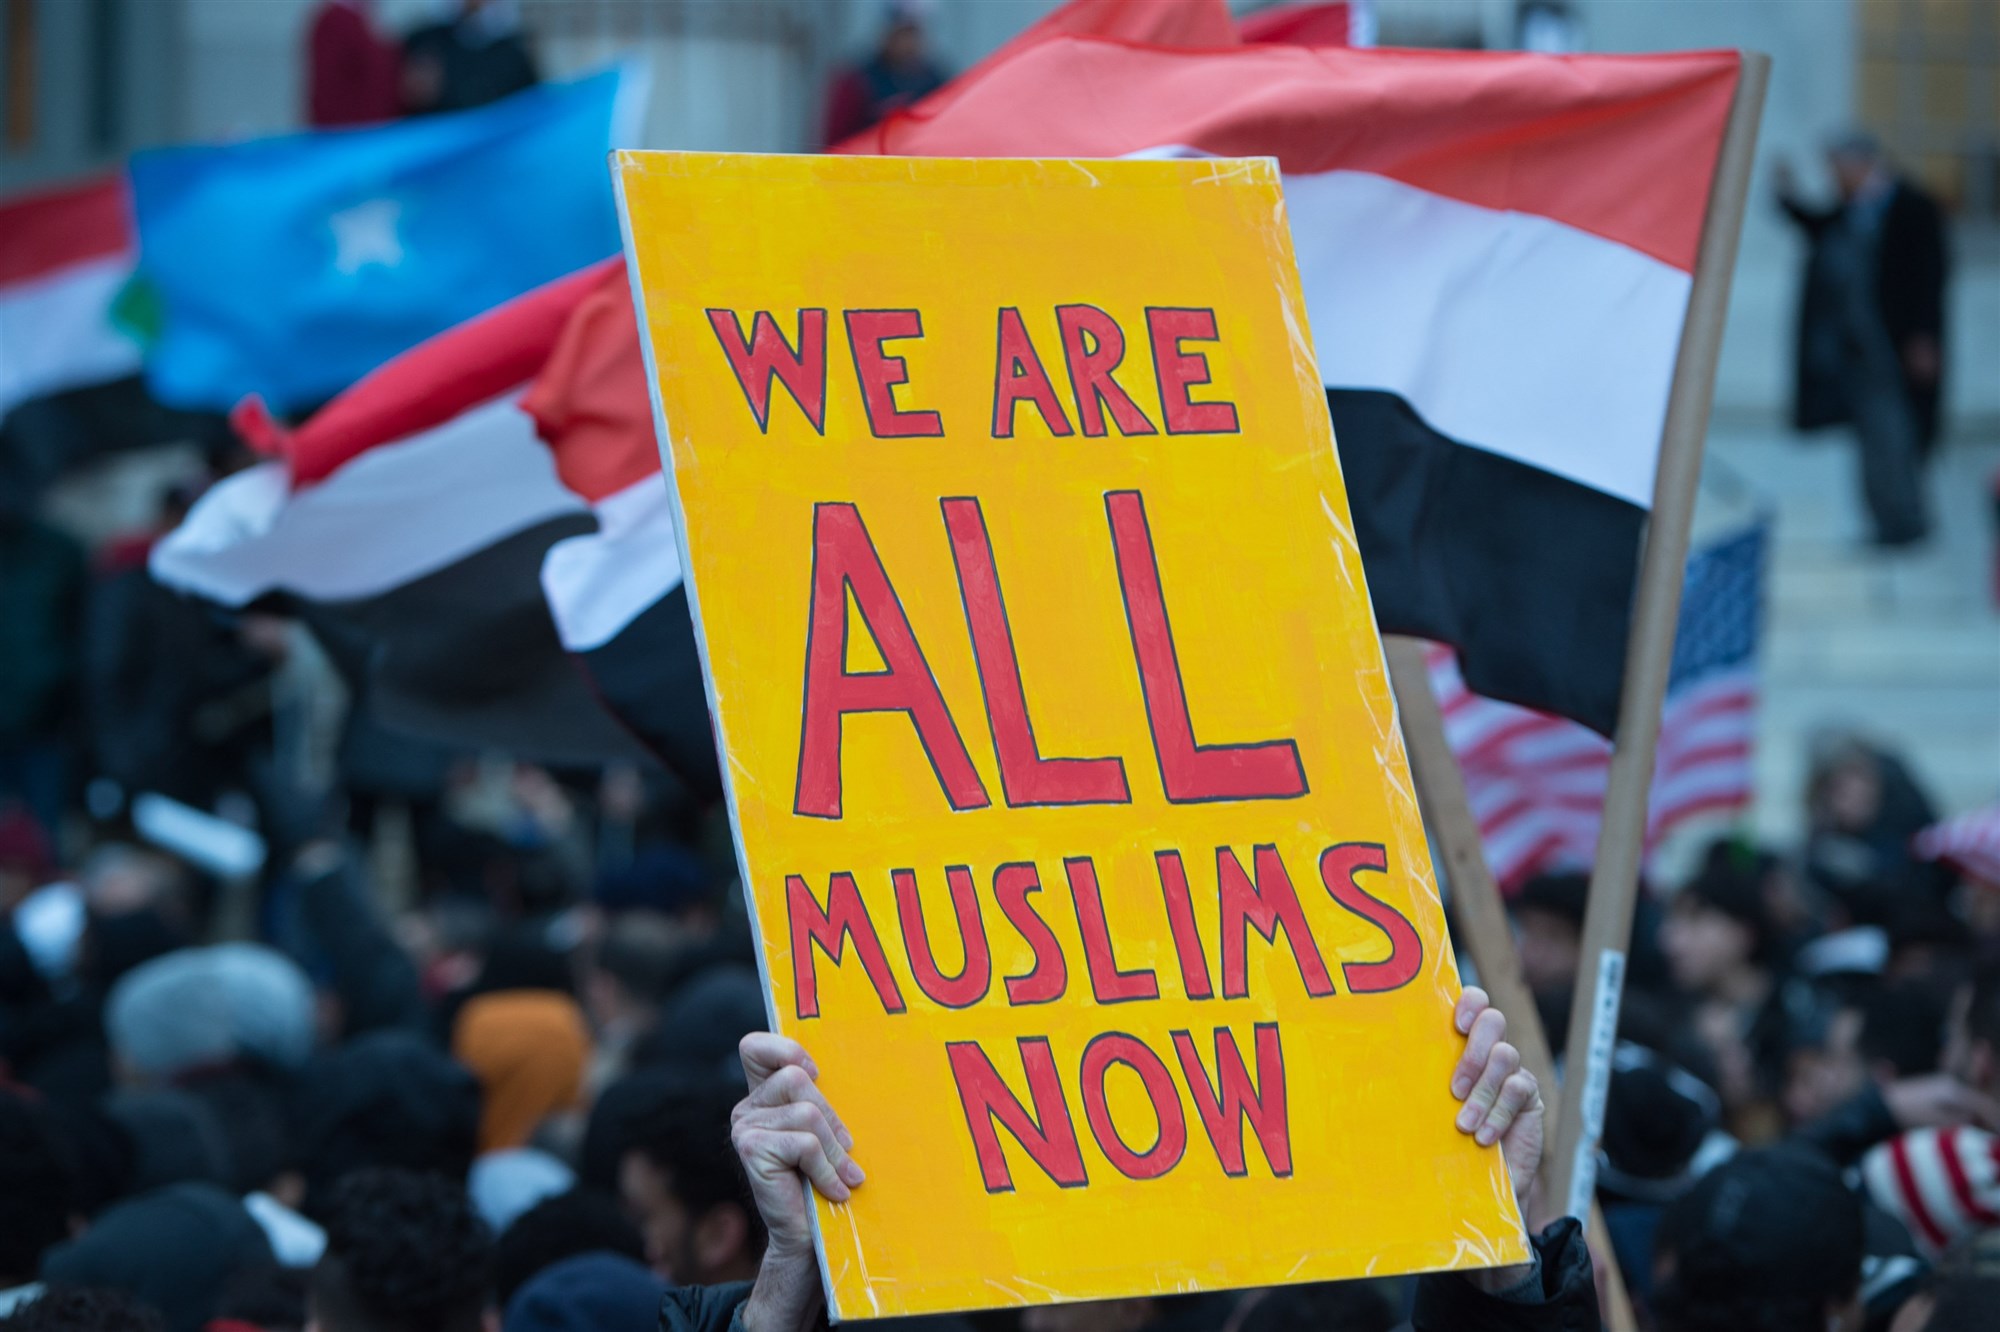 People rally at Brooklyn Borough Hall as Yemeni bodega and grocery-stores shut down to protest US President Donald Trump's Executive Order banning immigrants and refugees from seven Muslim-majority countries, including Yemen, on February 2, 2017 in New York. (Bryan R. Smith - AFP/Getty Images).